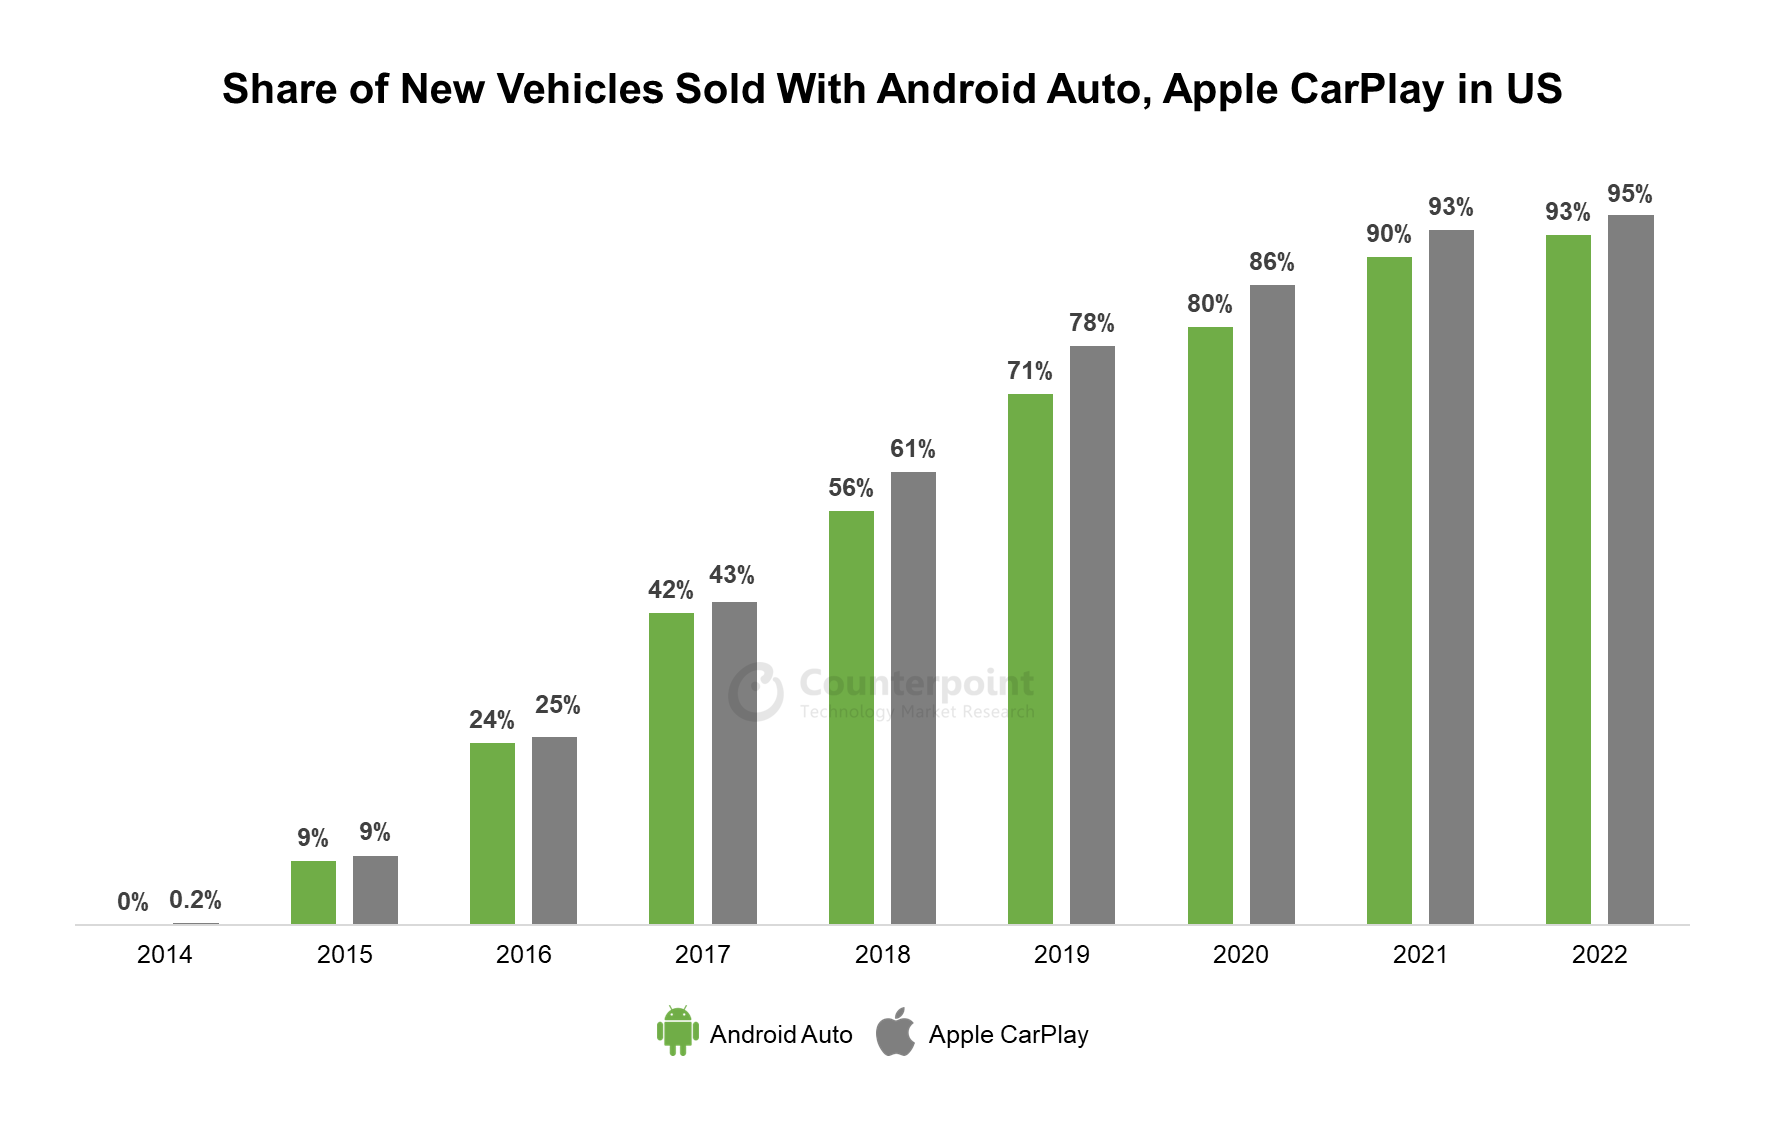 Android and the Open Automotive Alliance shift into the next gear, Fiat